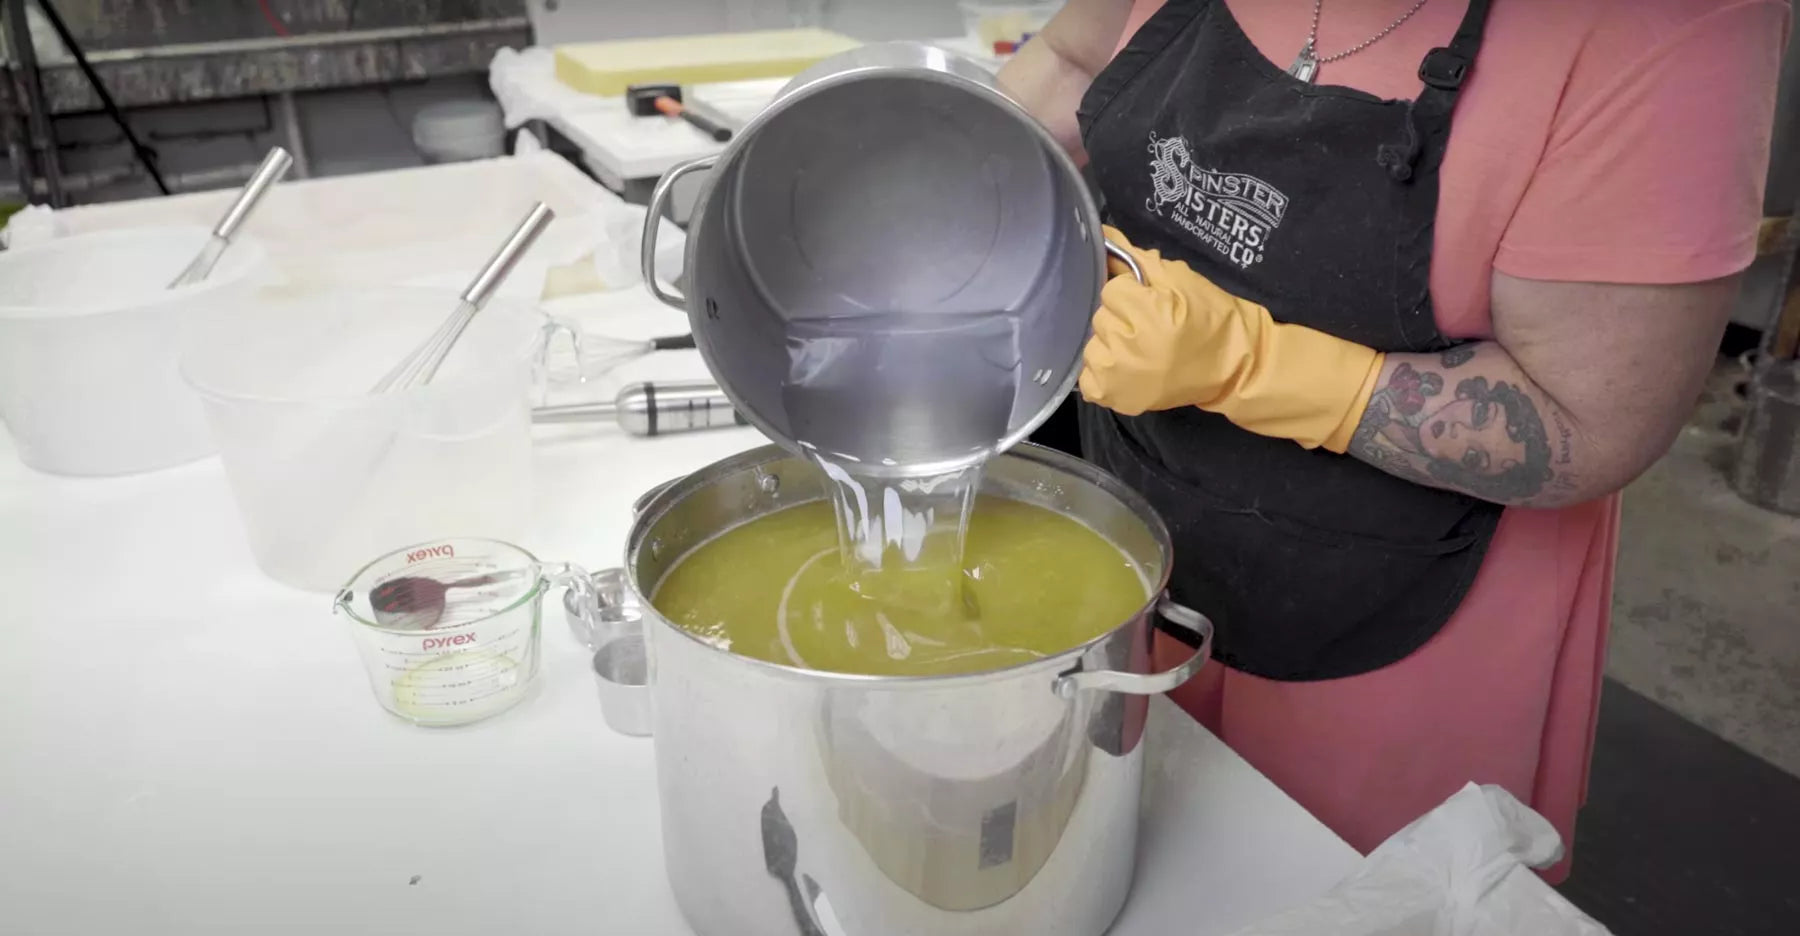 Video: Inside the Microsoapery & Our Mission